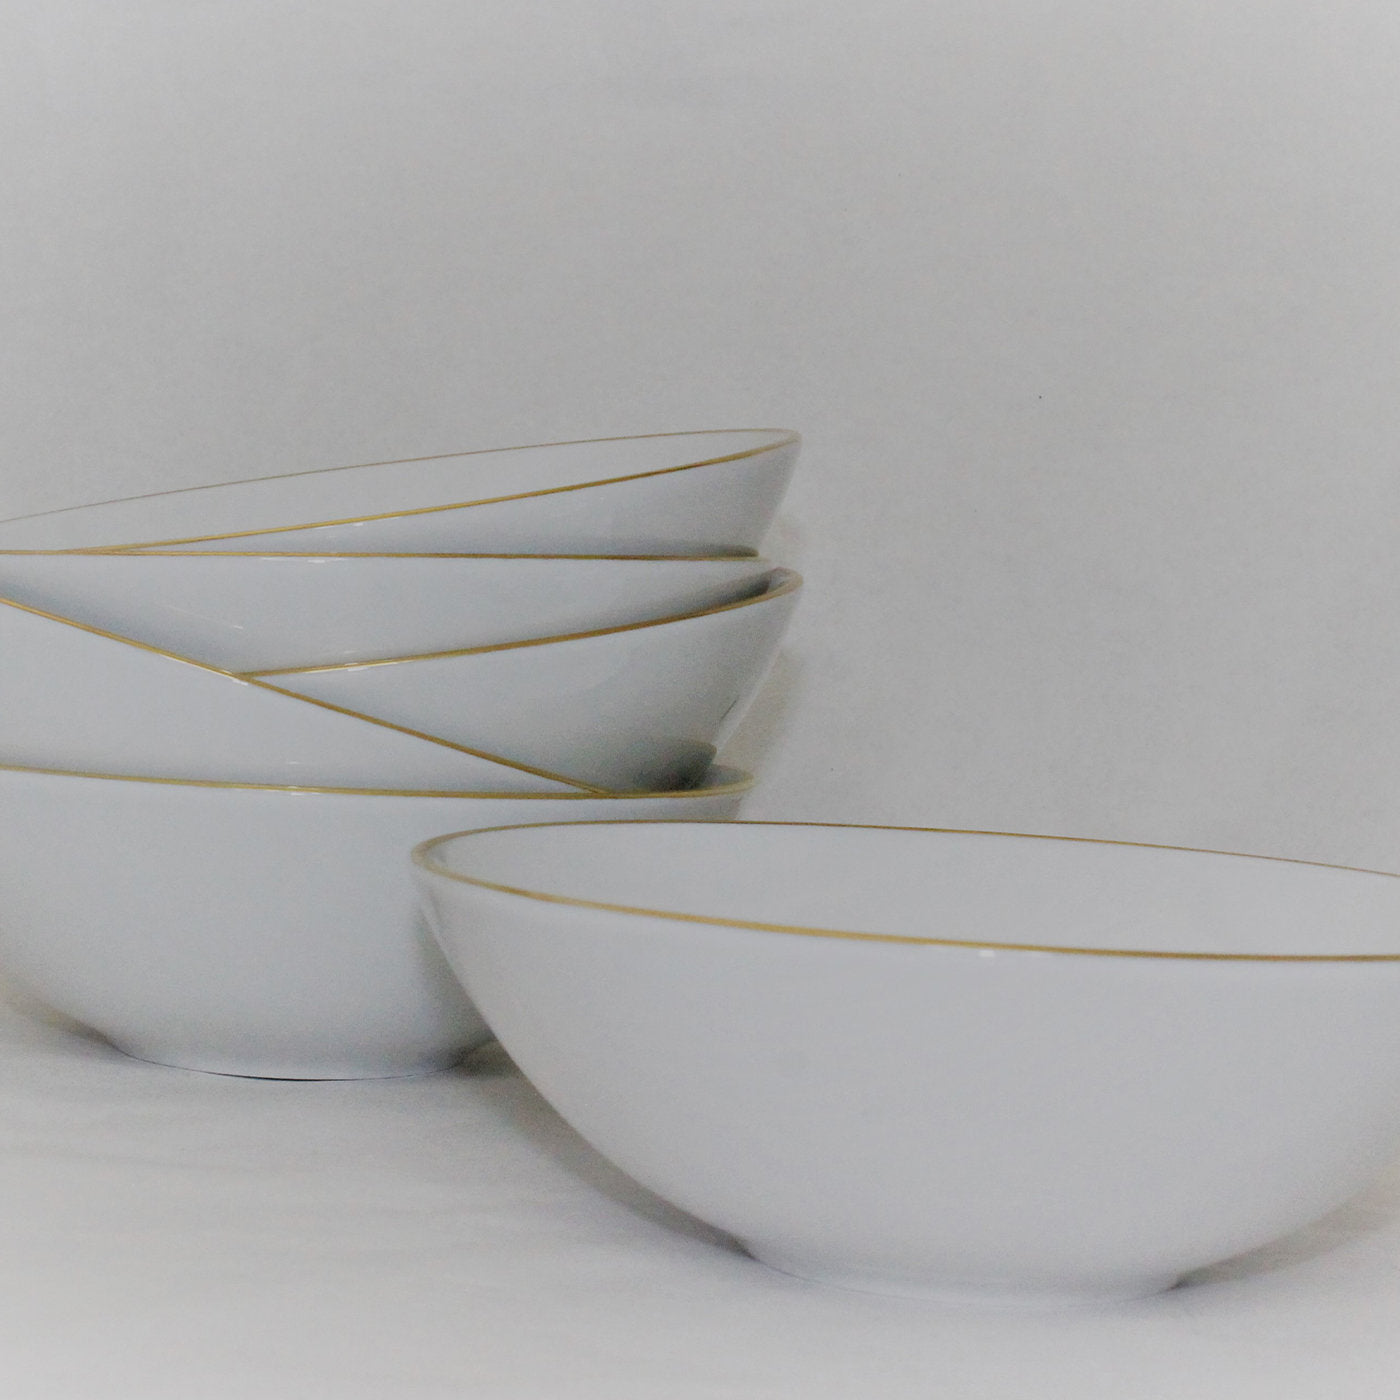 Concert Set of 6 Small Bowls - Alternative view 1